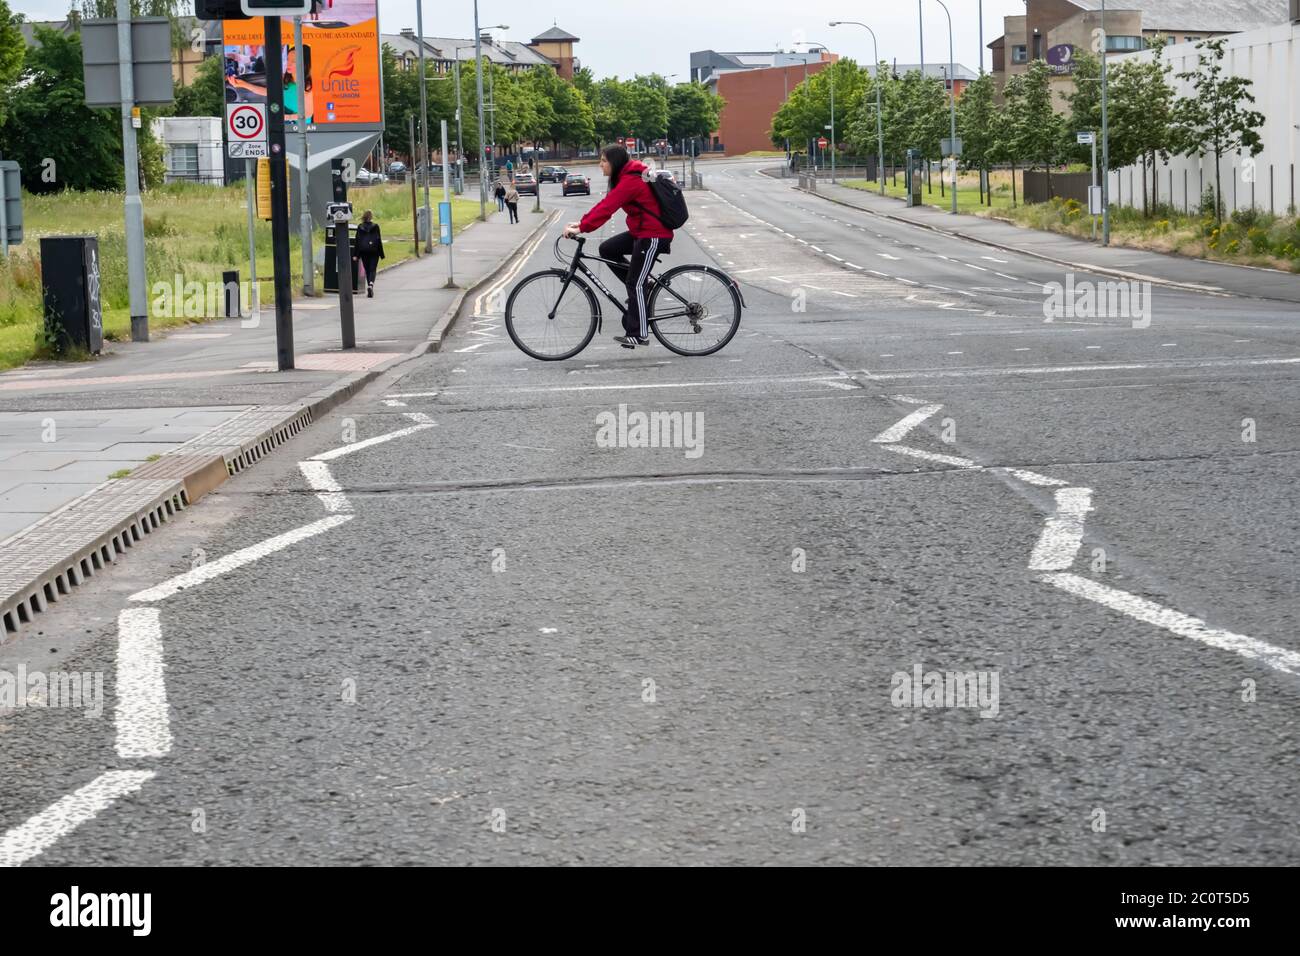 Glasgow, Scotland, UK. 12th June, 2020. A cyclist crosses Crown Street at traffic lights. The Scottish Government announced on 28th May an easing of the coronavirus lockdown rules at the start of phase one of a four part transition out of lockdown. Credit: Skully/Alamy Live News Stock Photo